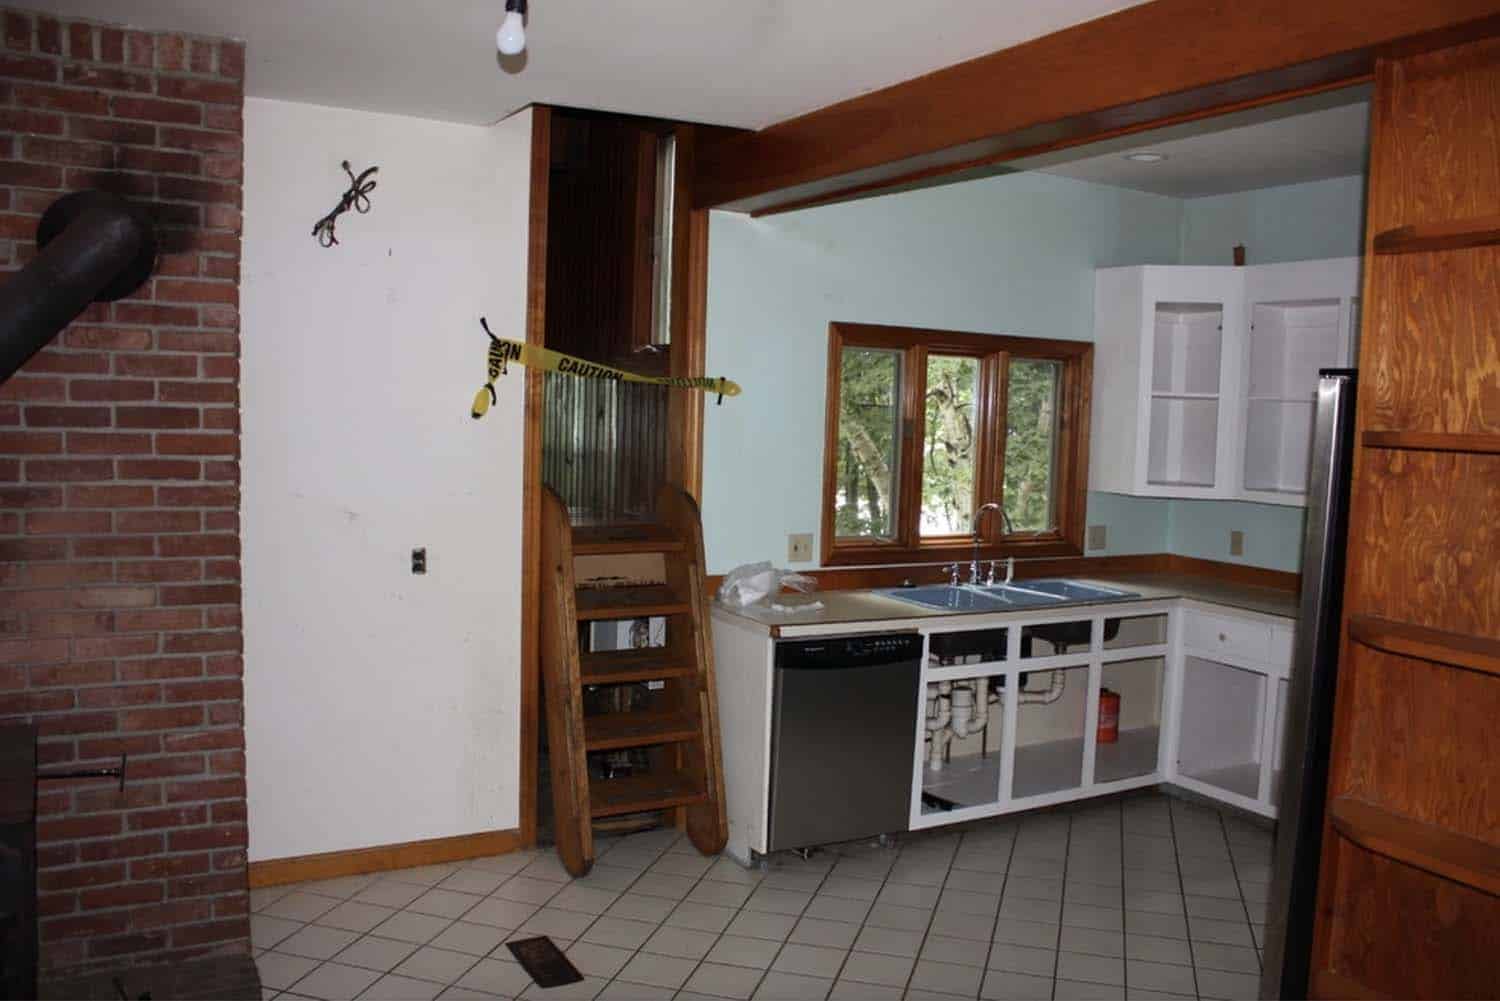 historic cottage kitchen before the renovation